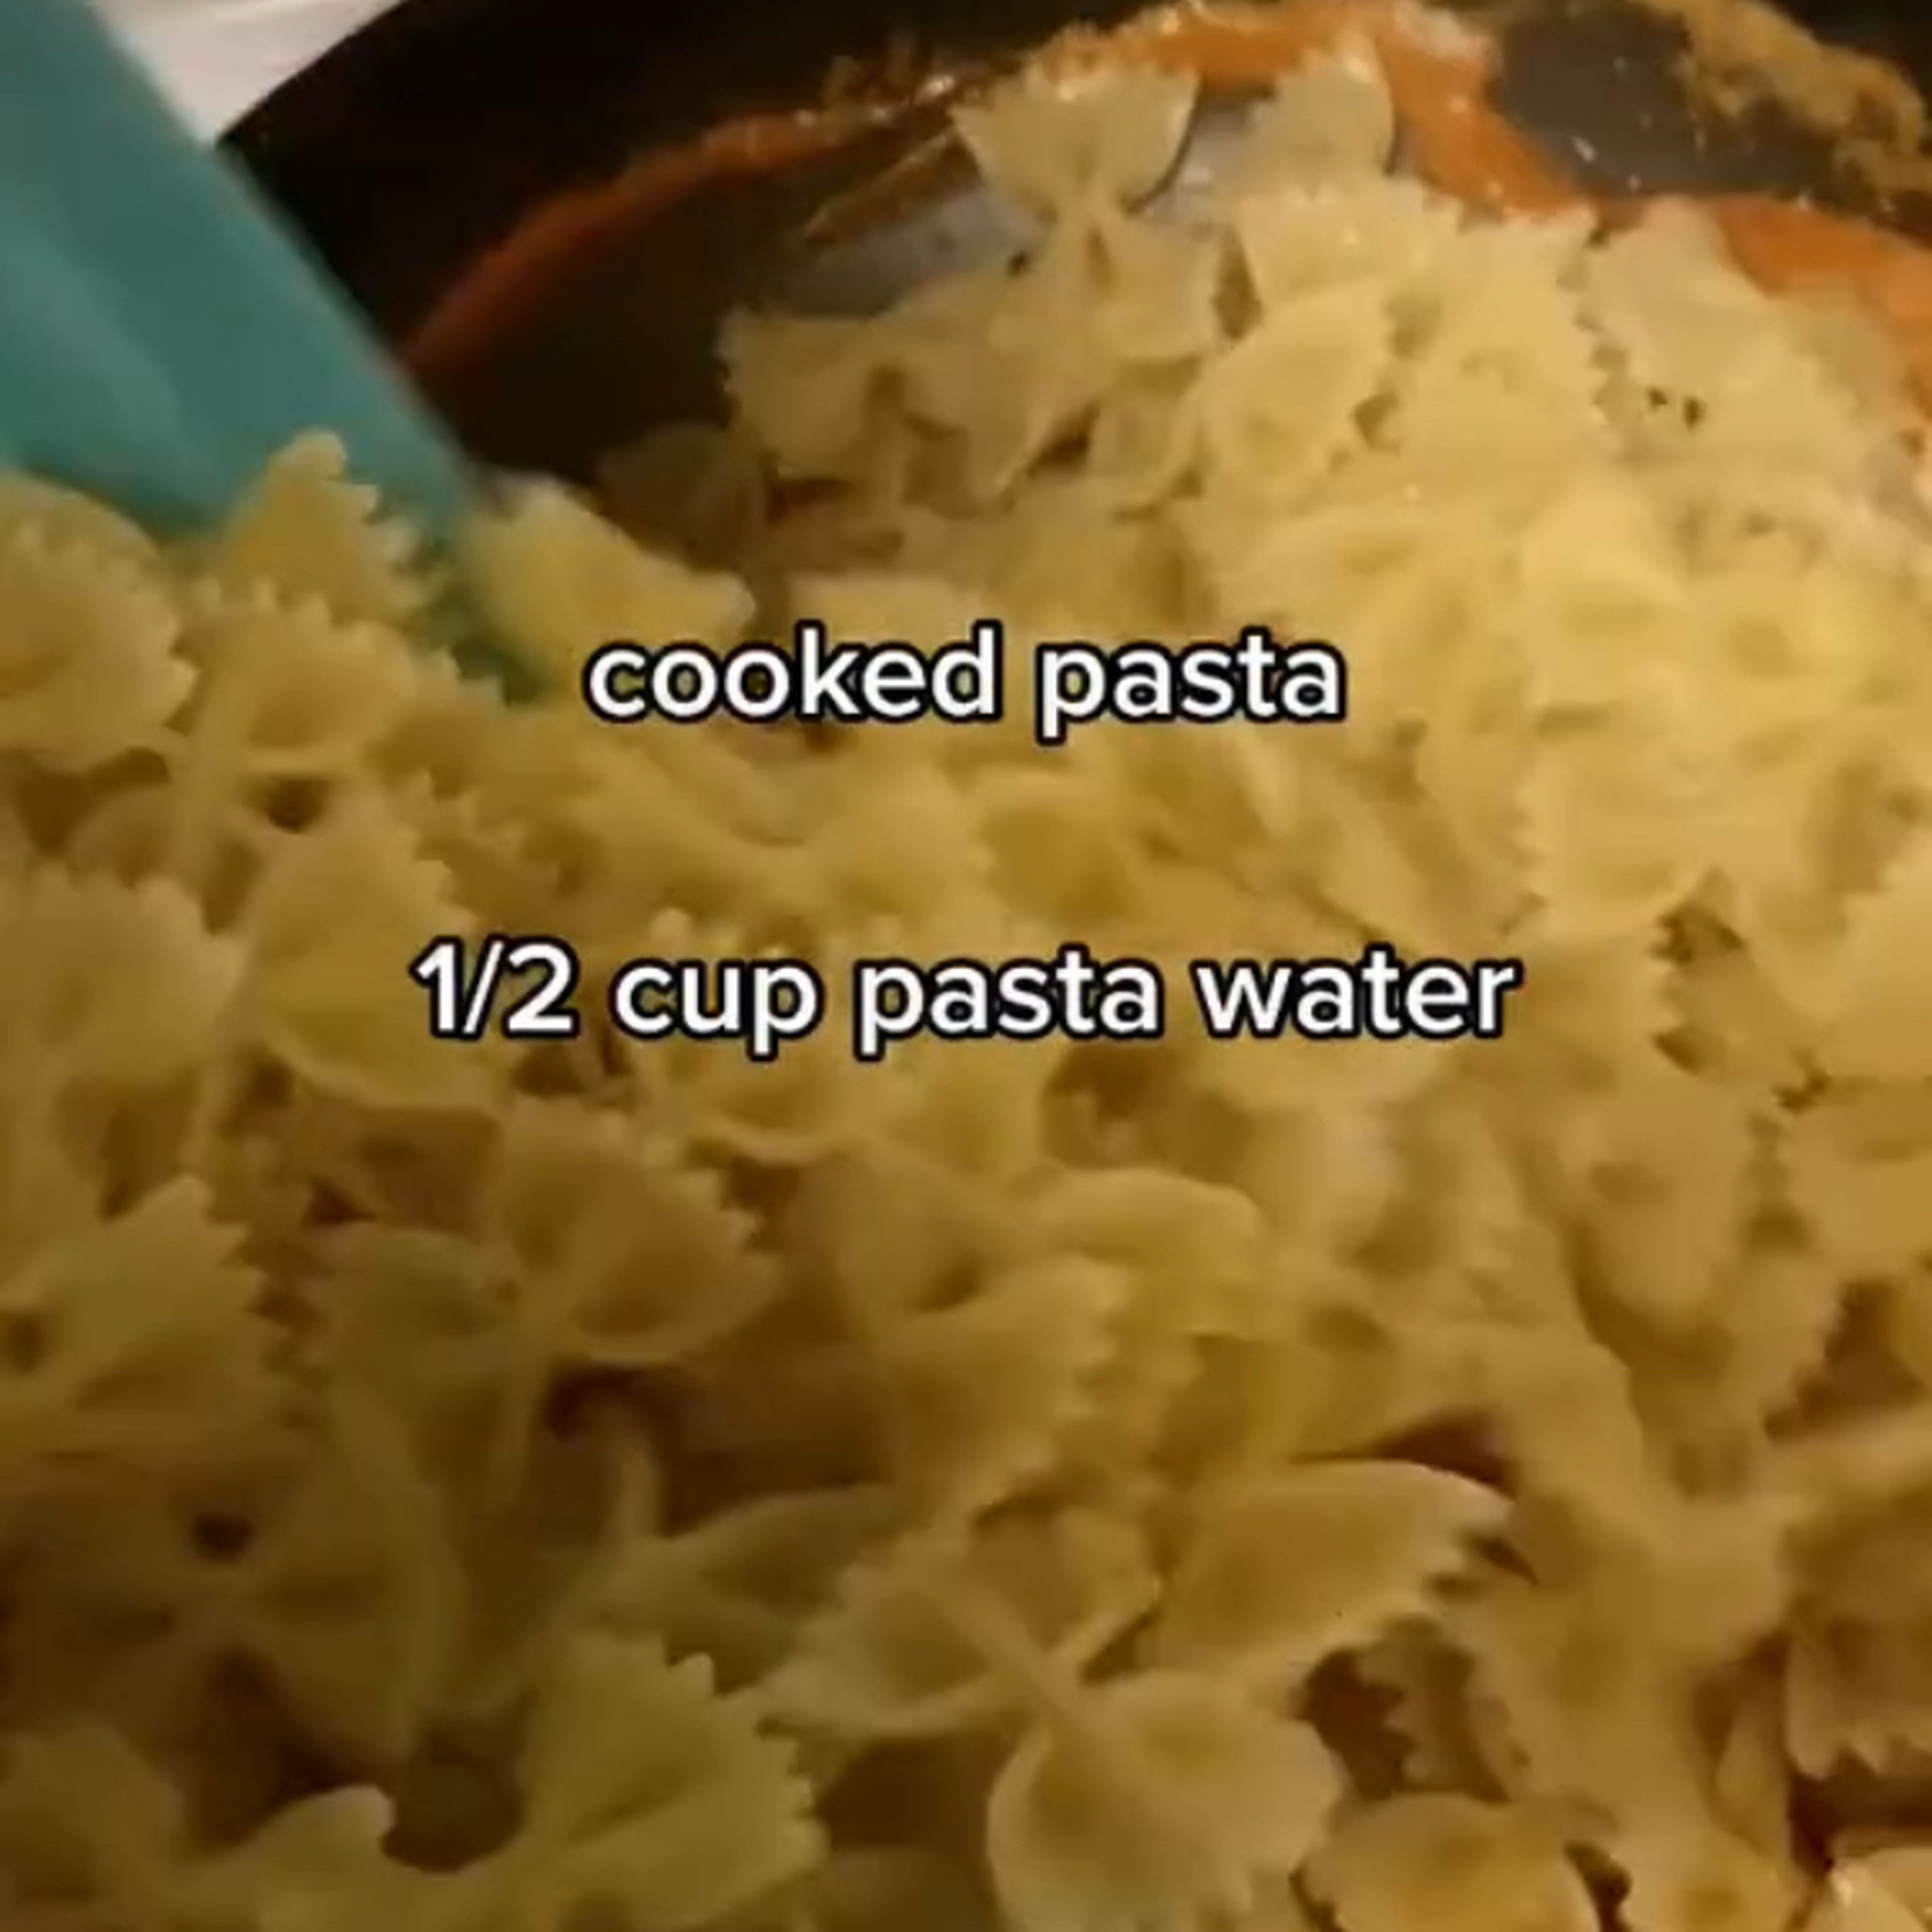 Pour the pasta into the pan, and the pasta water.